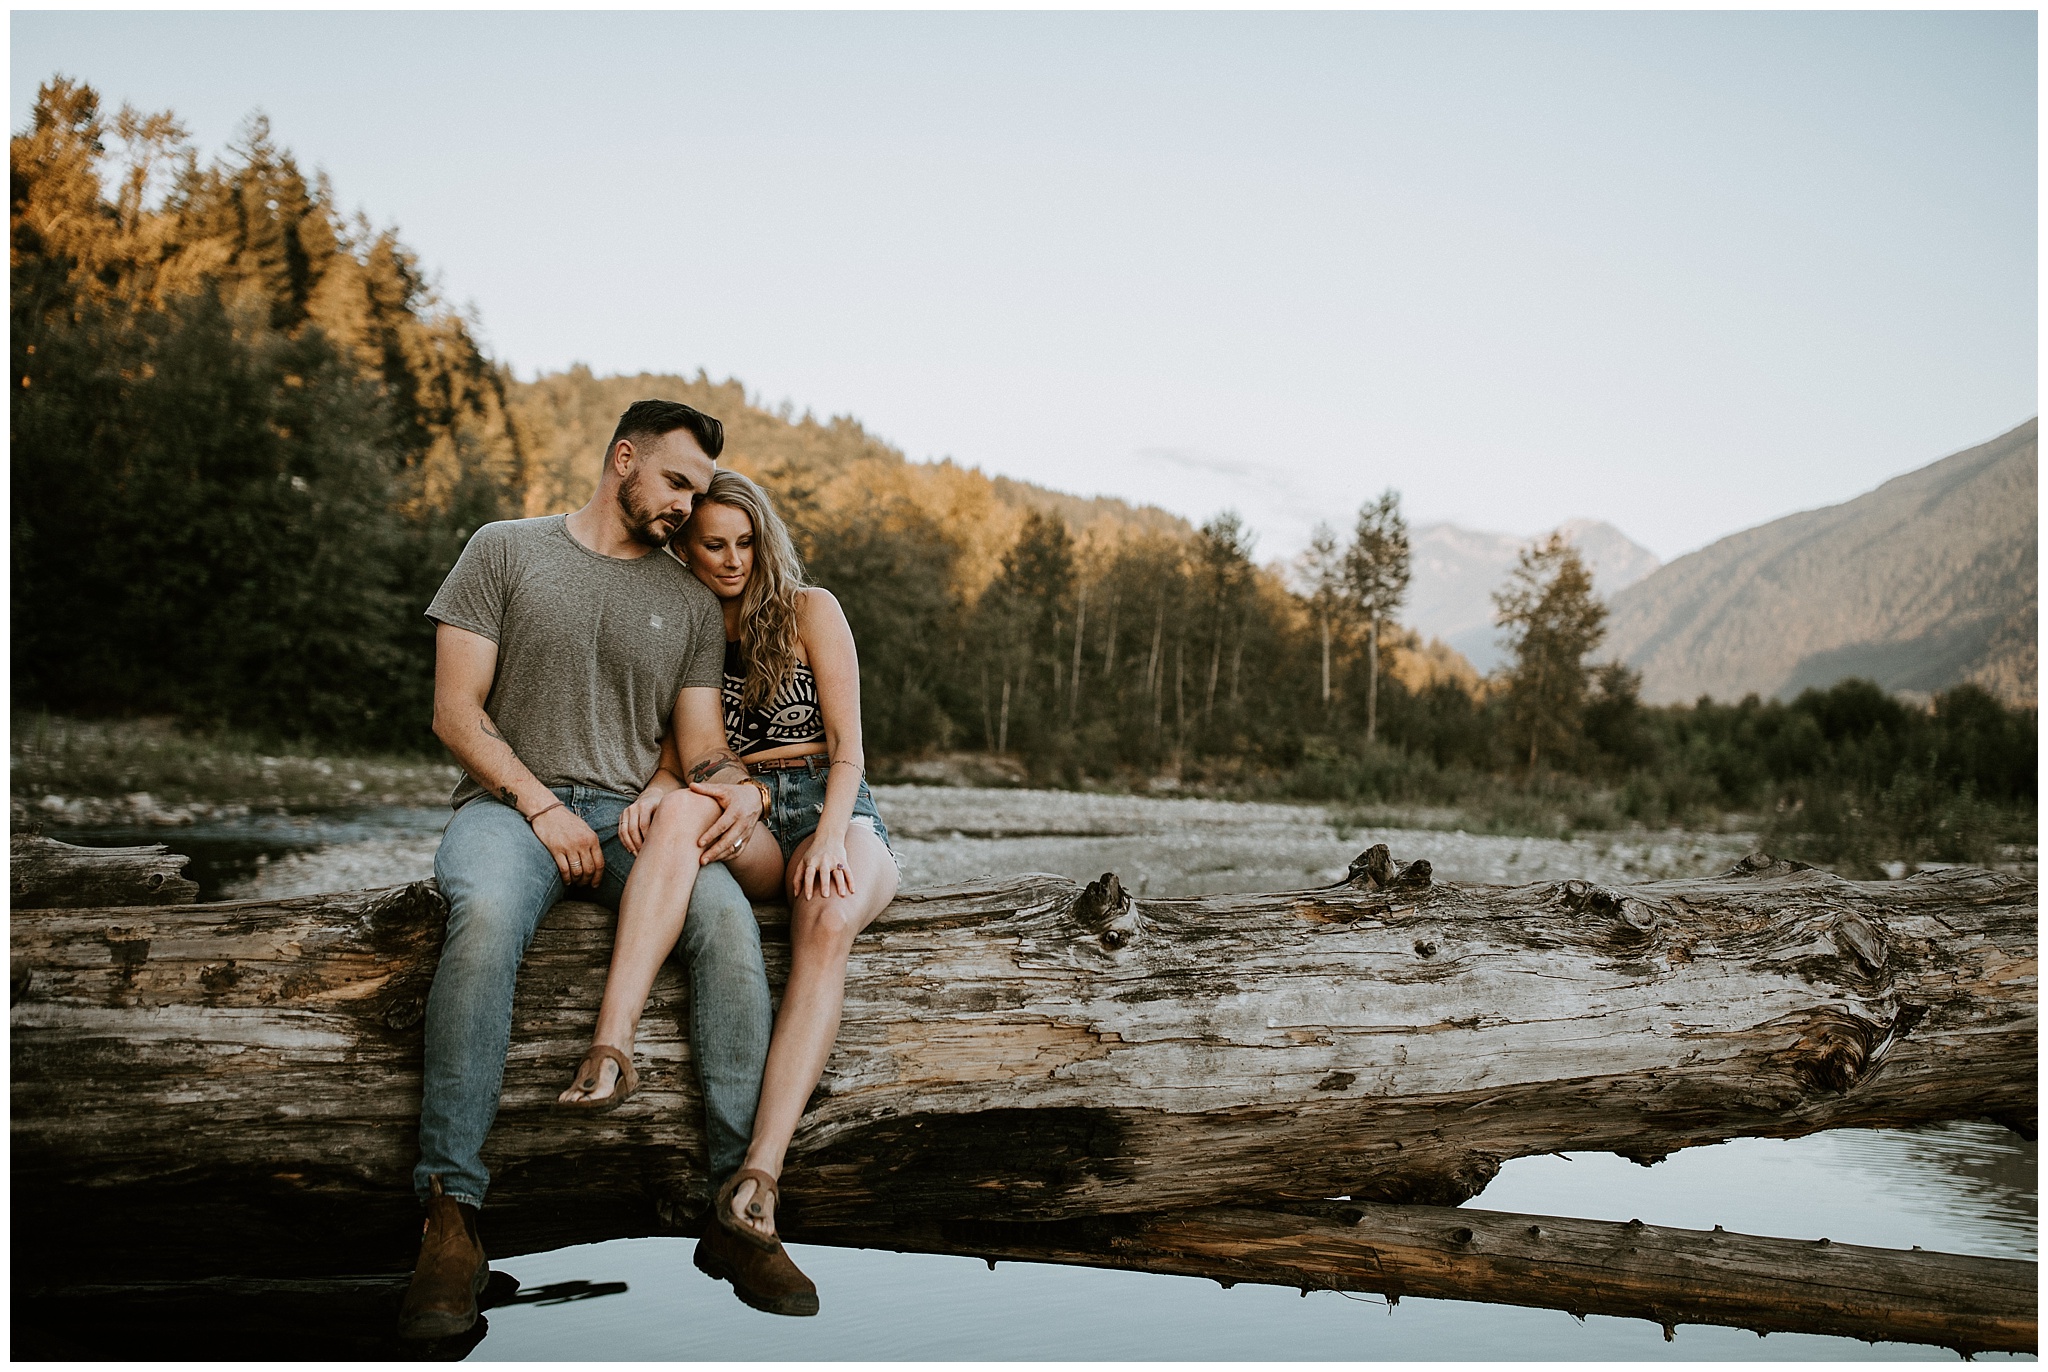 An engagement session on the Vedder River in Chilliwack